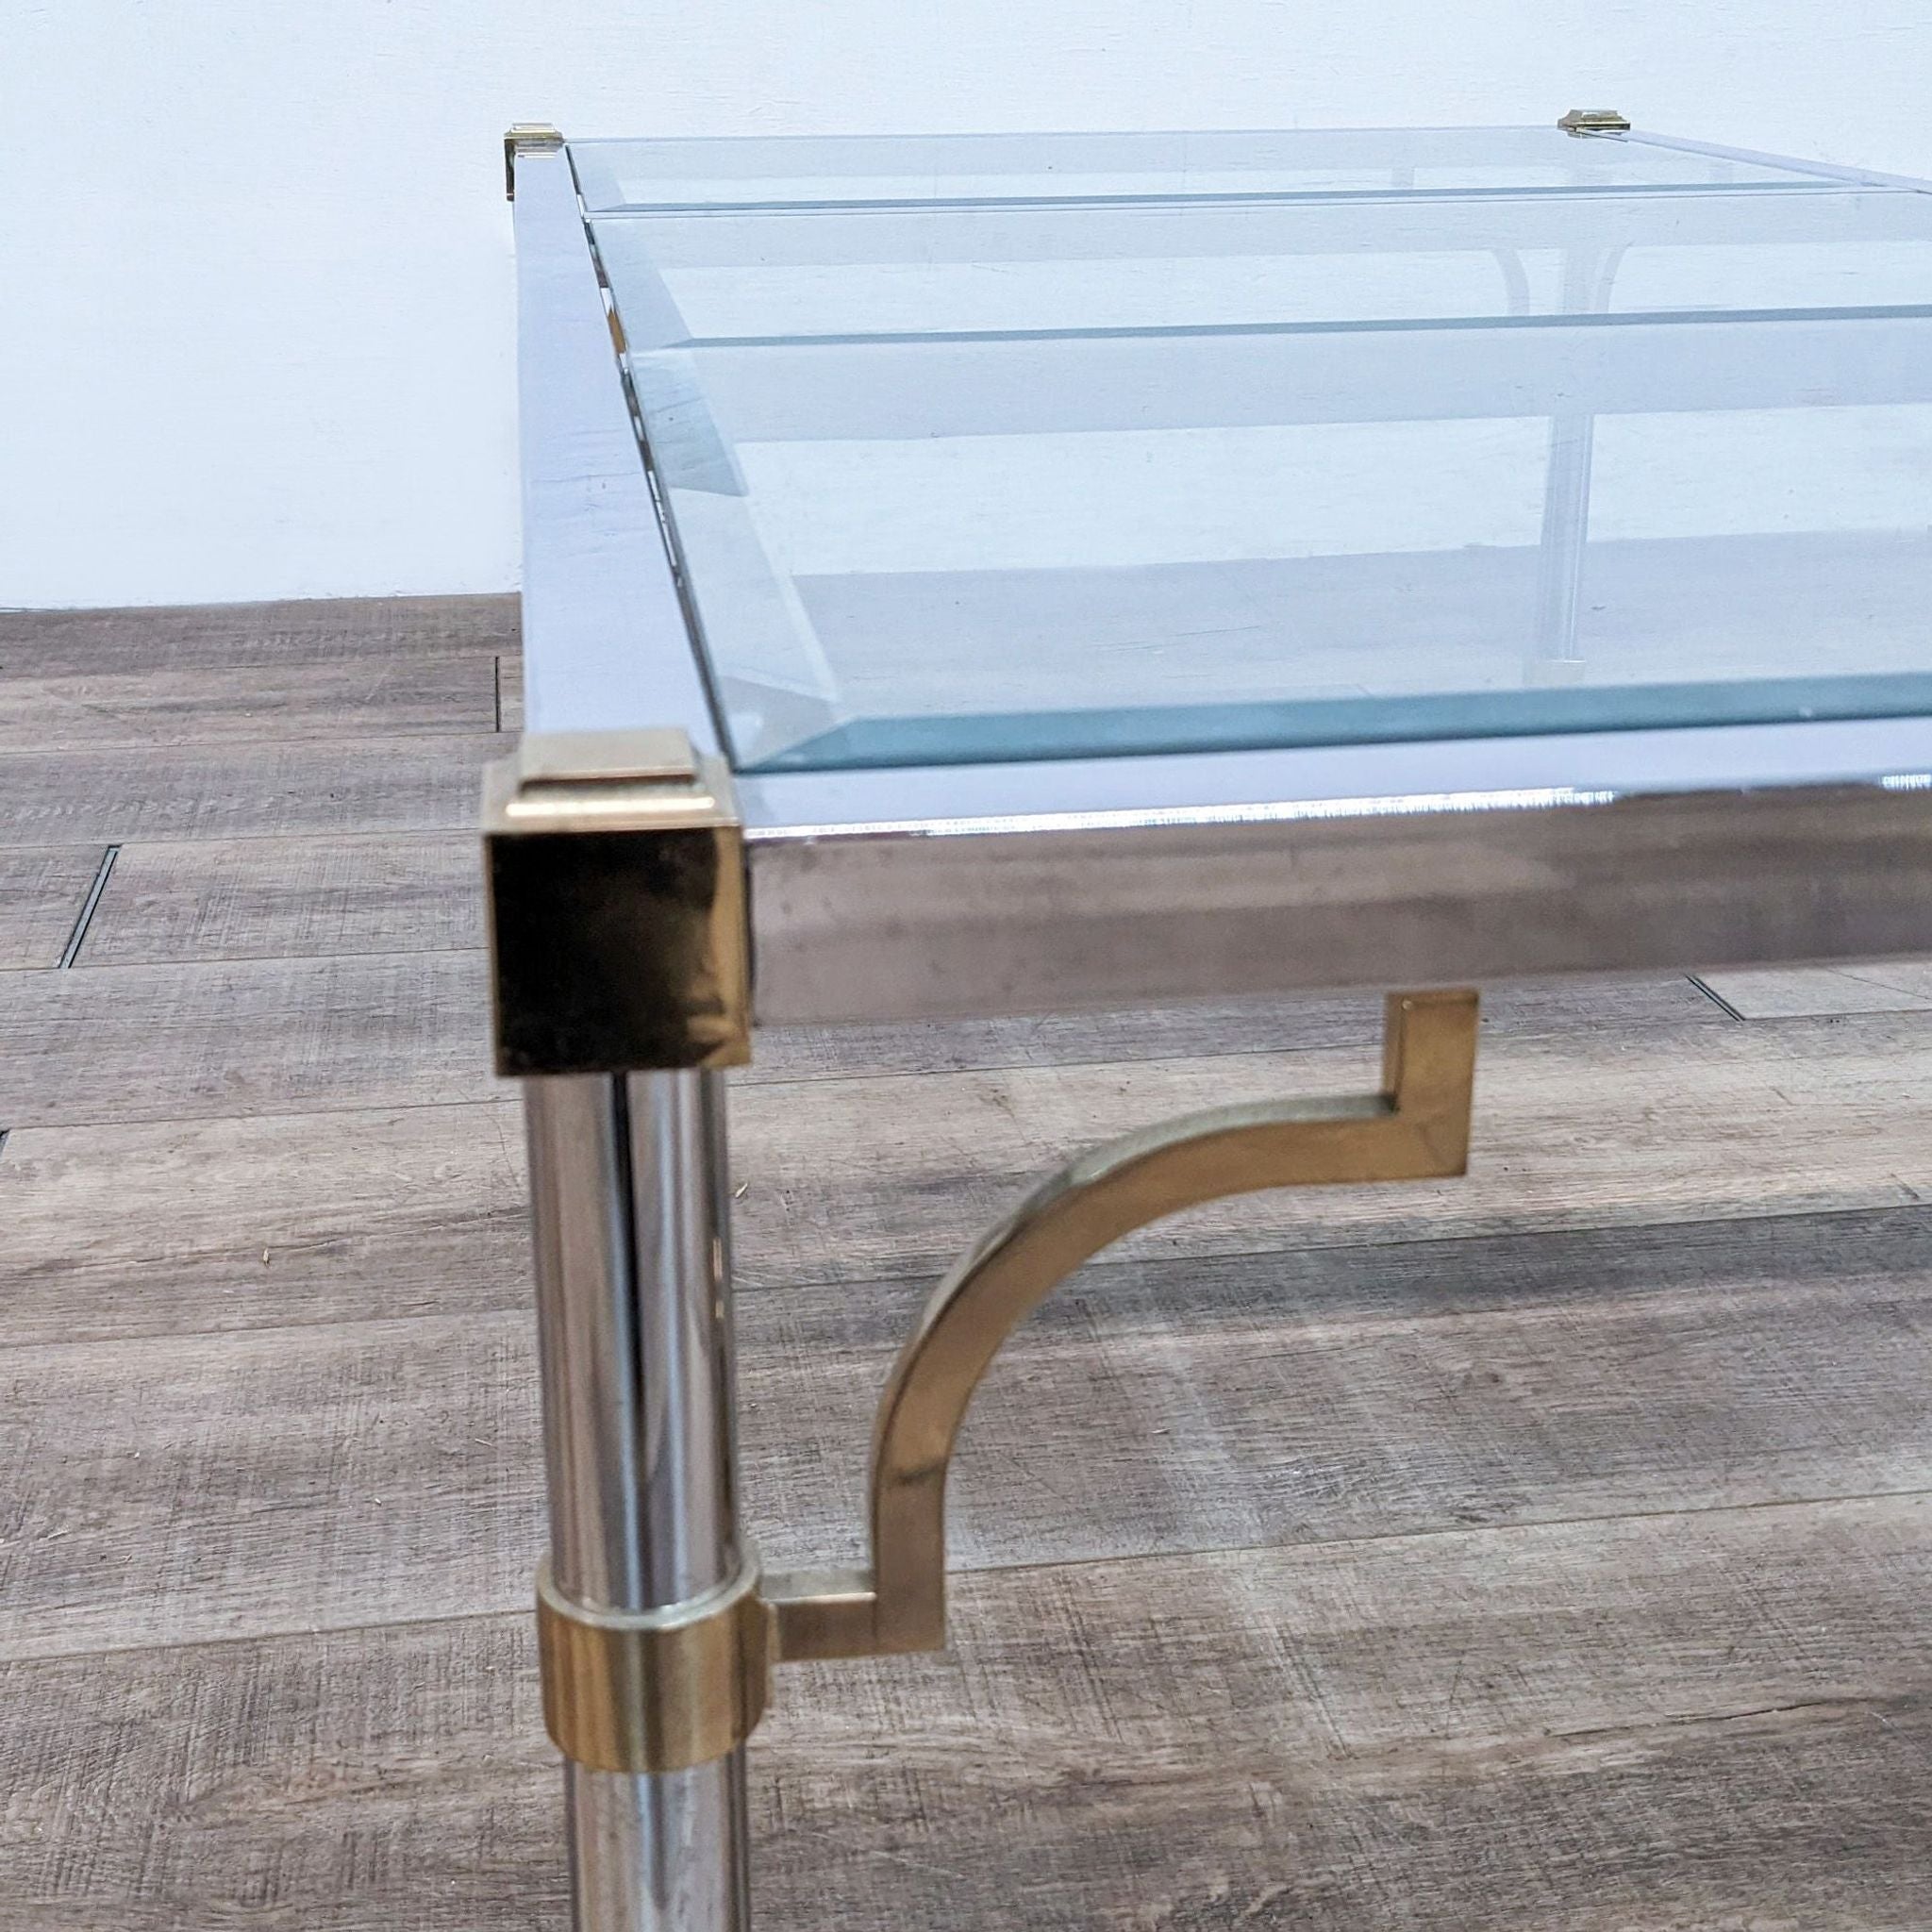 Reperch brand coffee table with a clear glass top and polished metallic legs on a wooden floor.